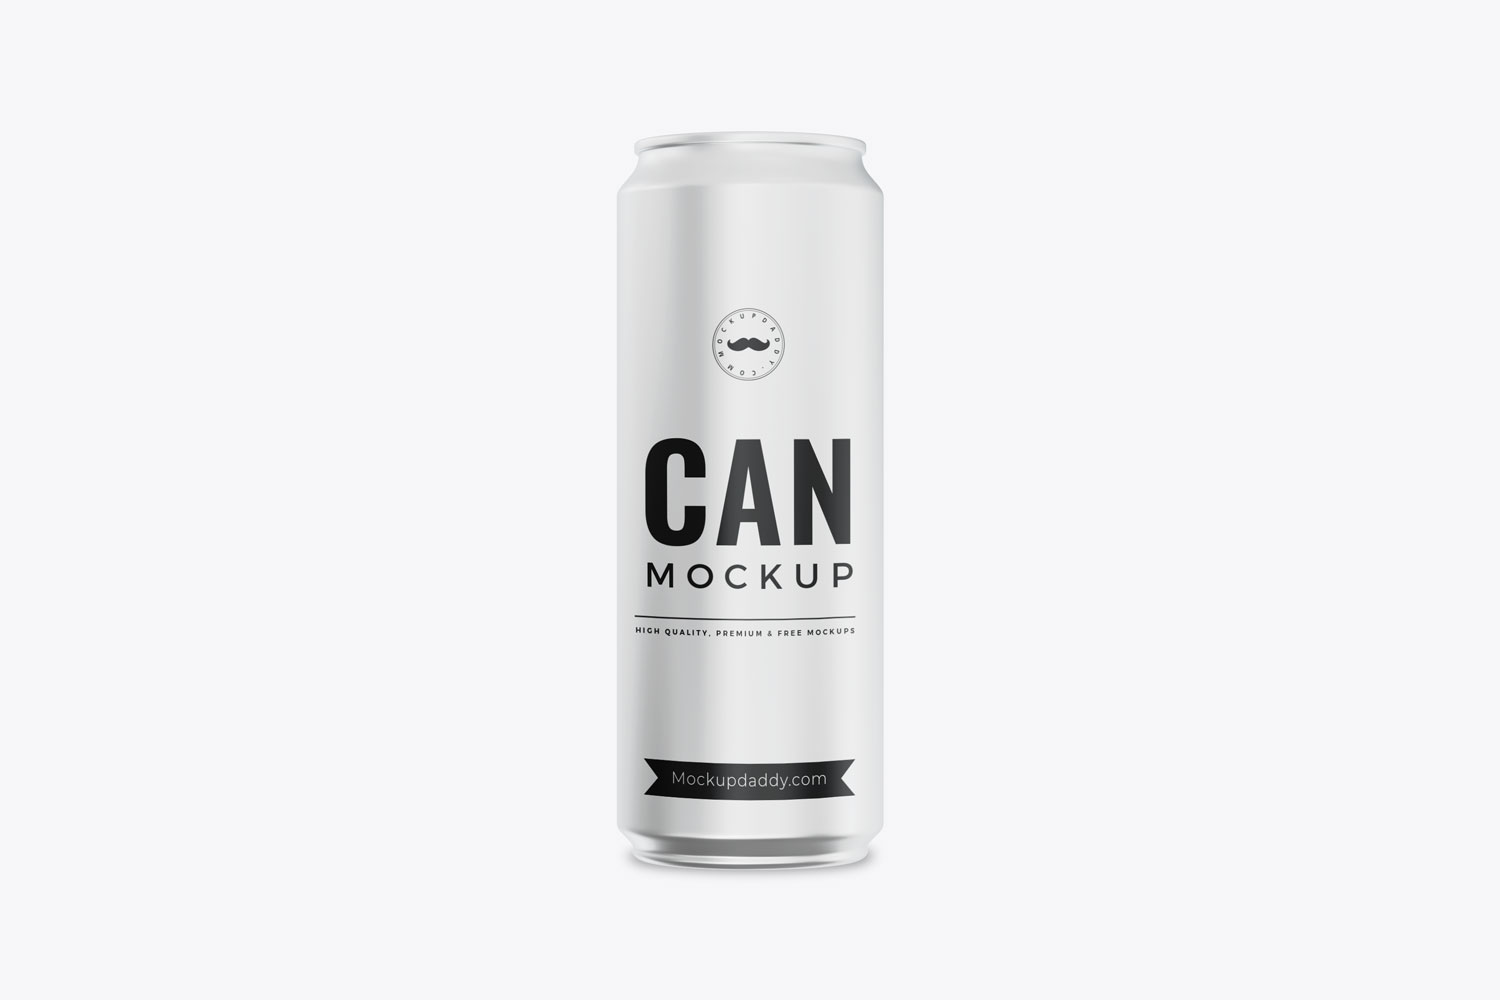  Silver Soda Can Front Mockup with black text.